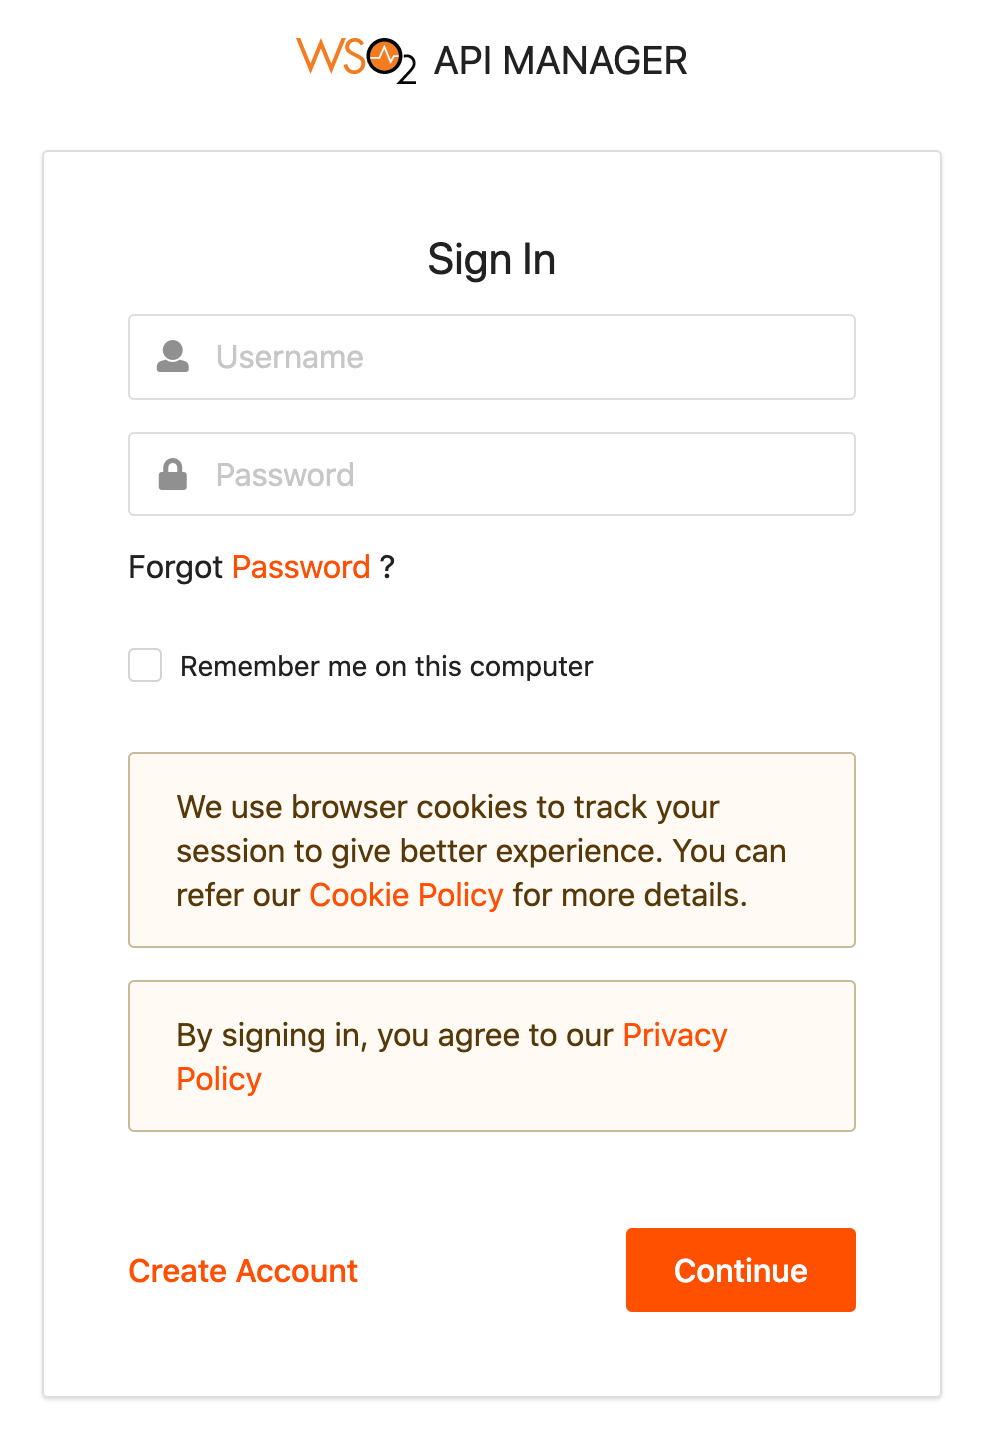 Forgot password link in sign in page